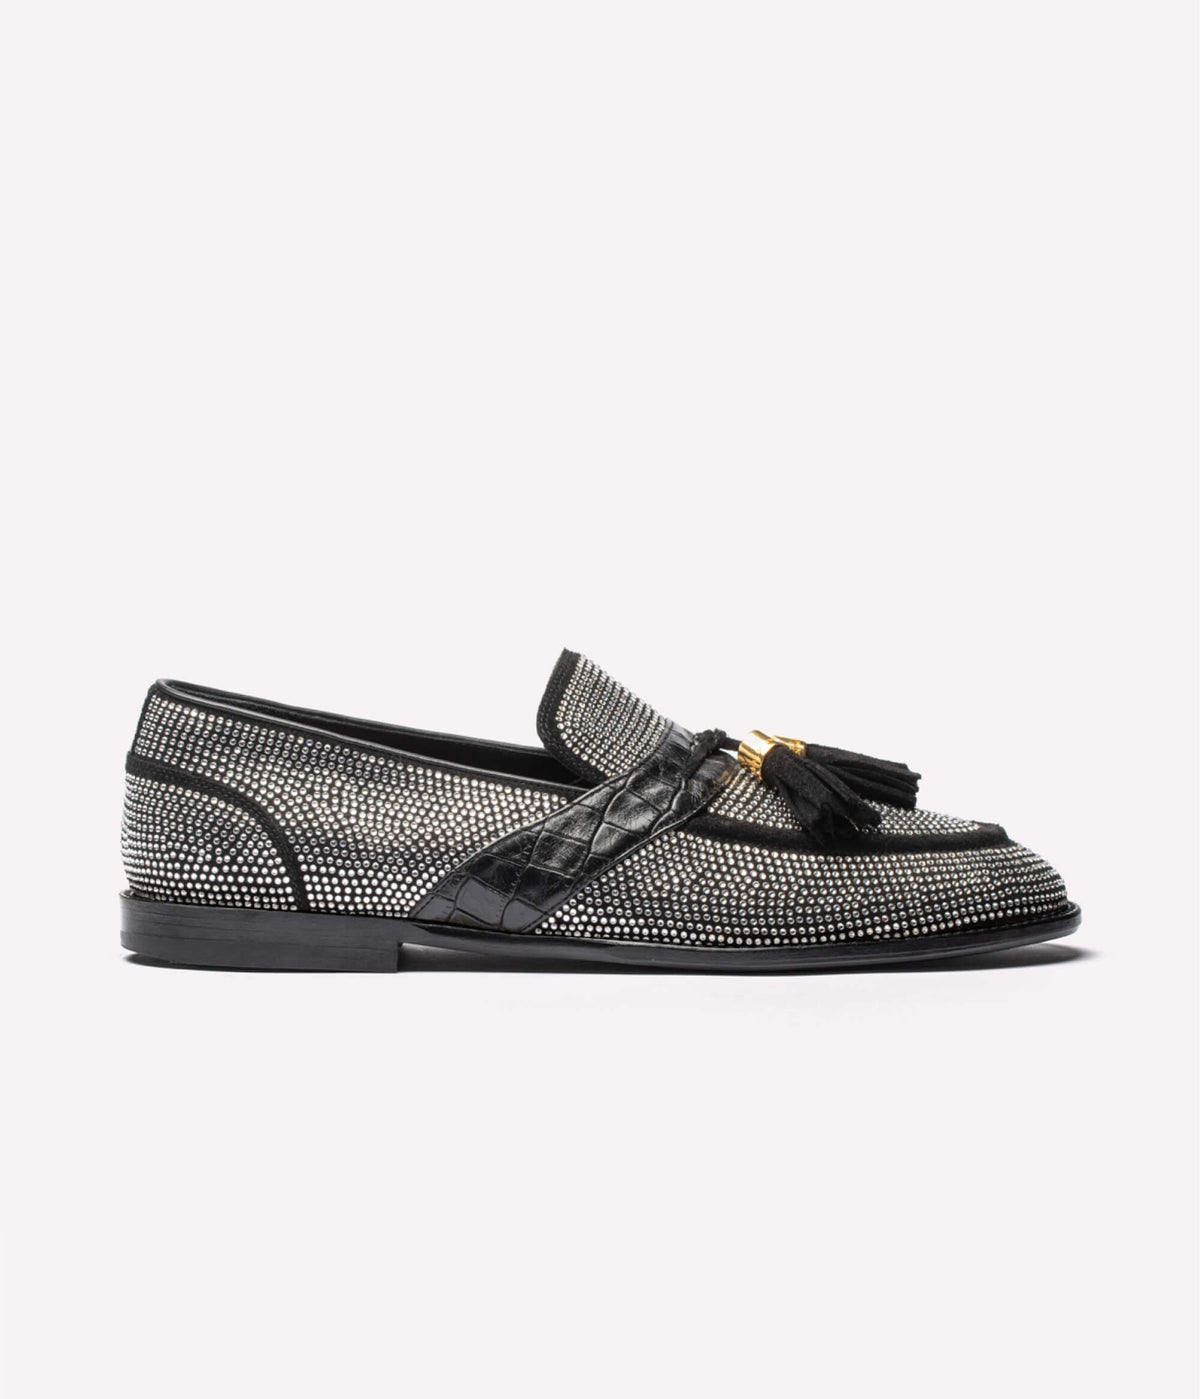 HUMAN RECREATIONAL SERVICES DEL REY LOAFER IN CRYSTAL-ENCRUSTED ITALIAN CALFSKIN SUEDE